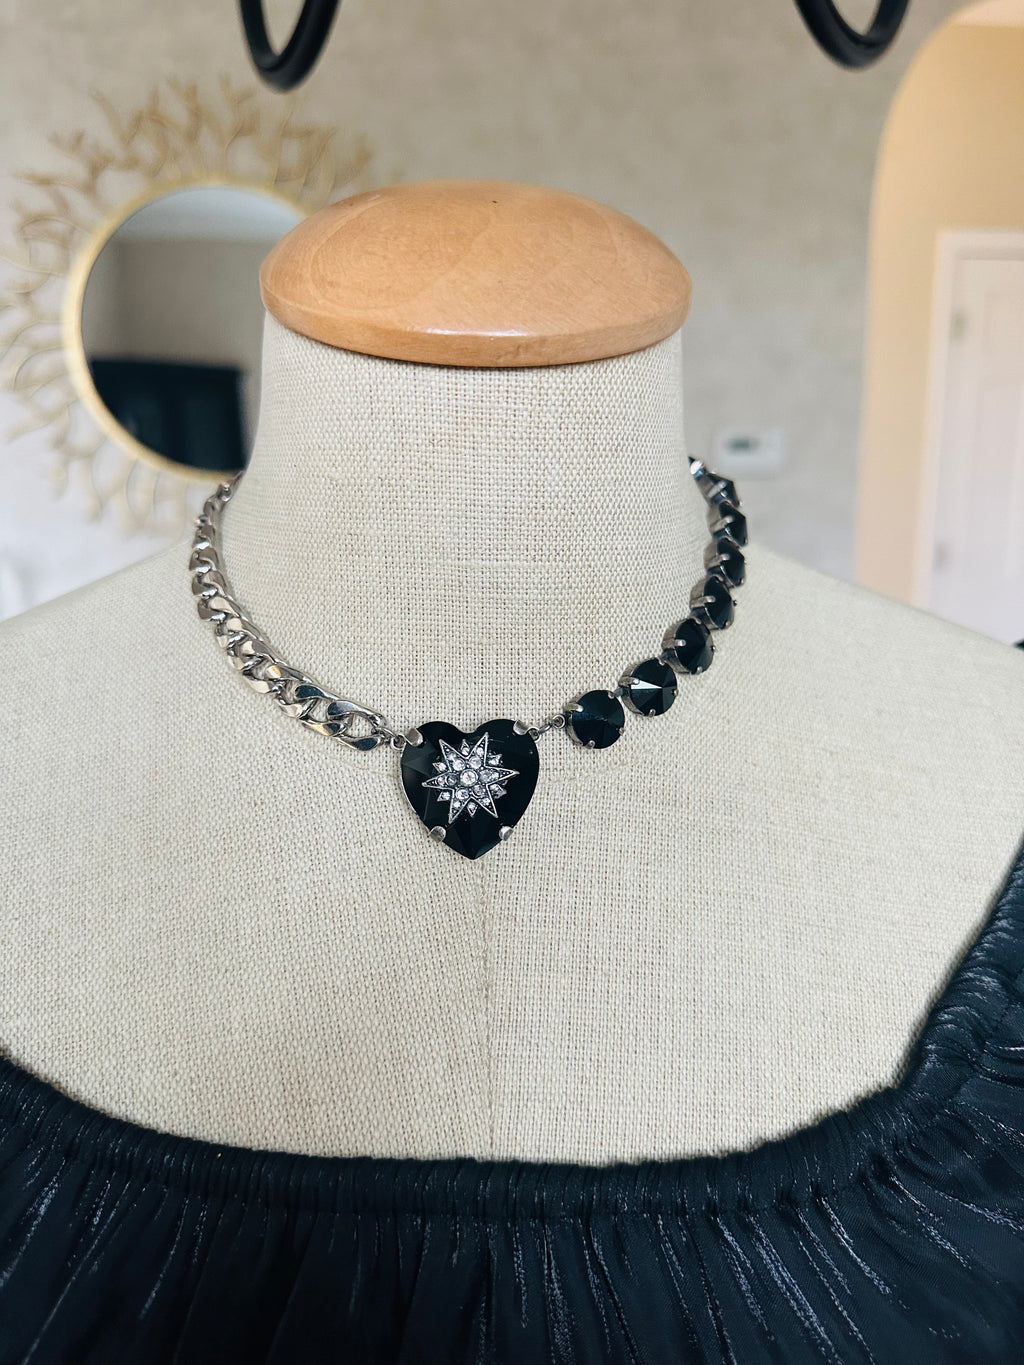 Split Chain Necklace with Black Star Pendent